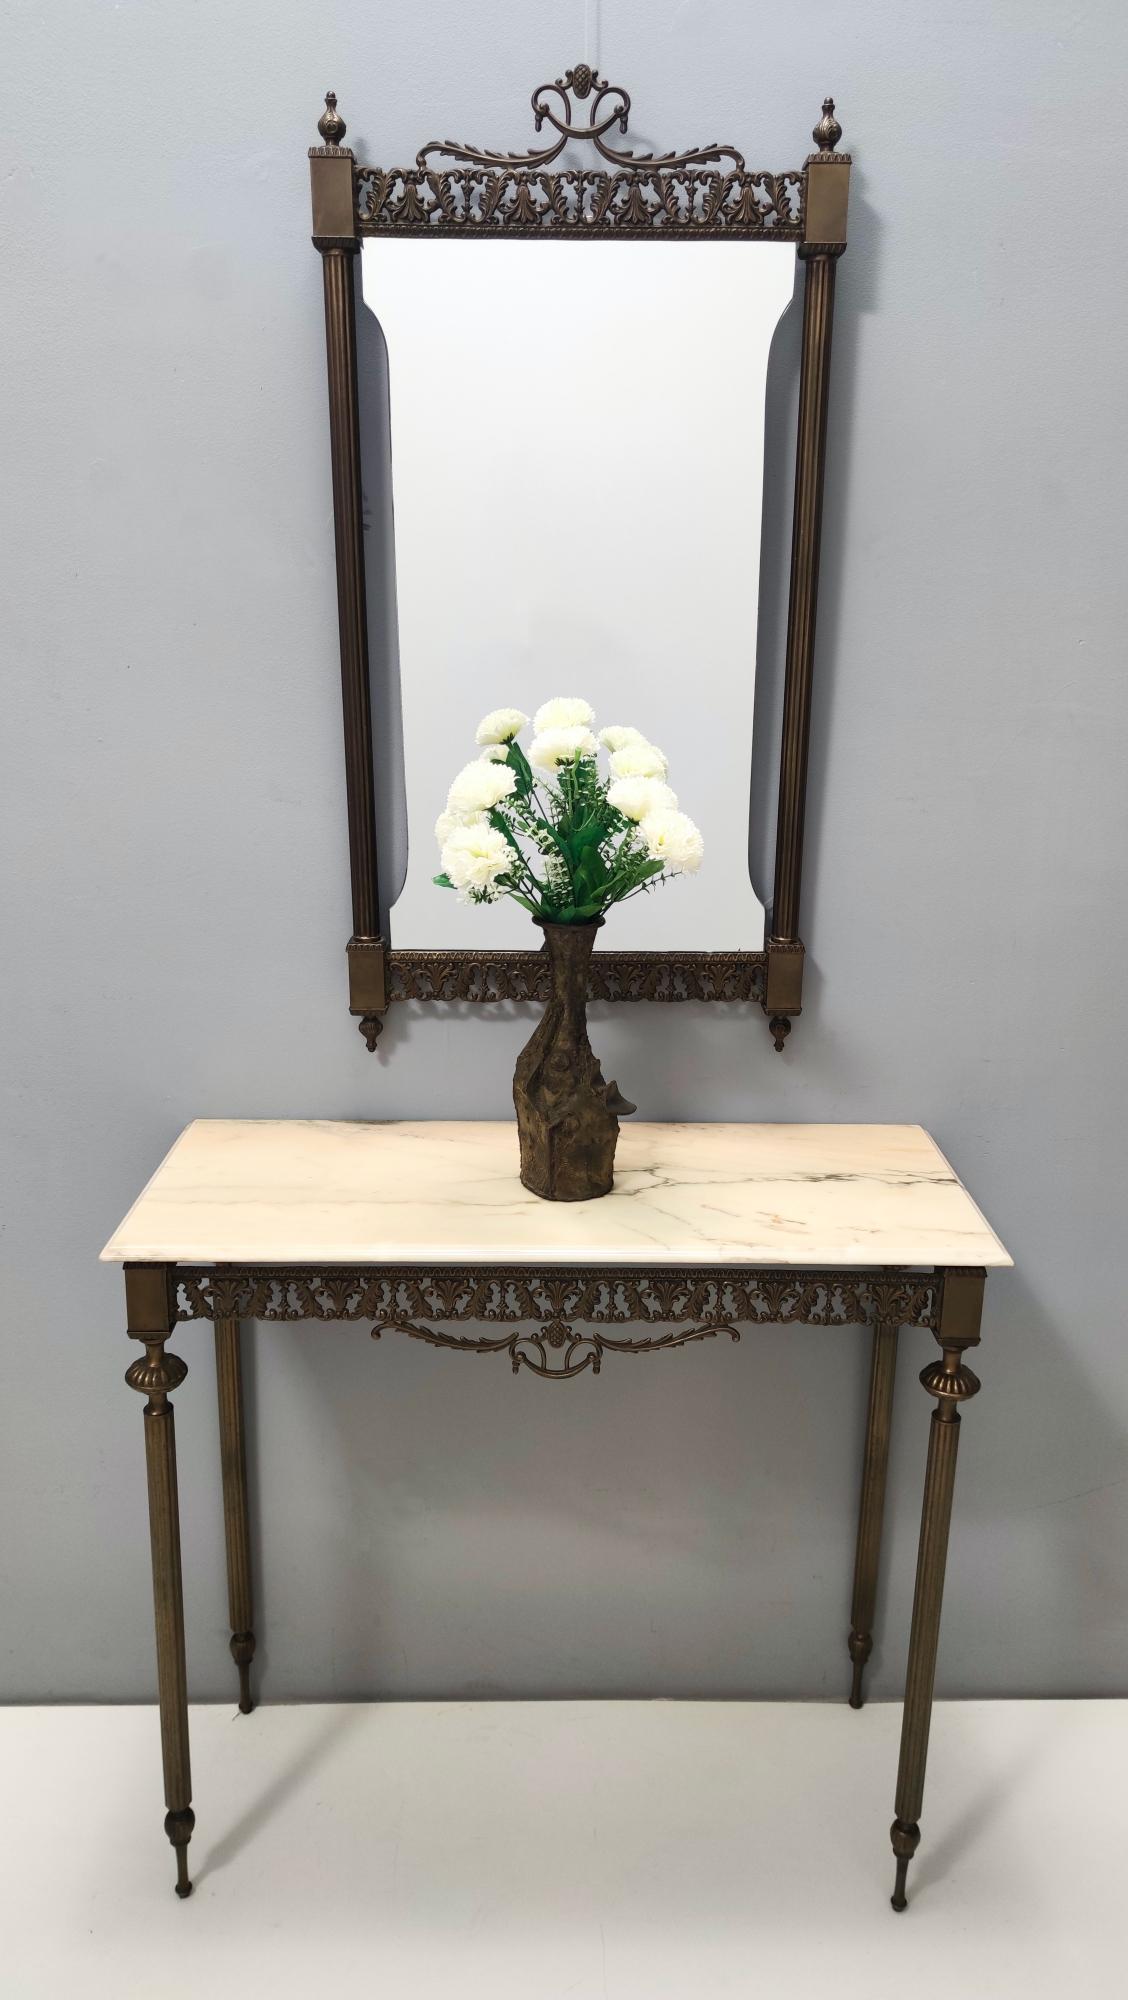 Italy, 1960s.
The console table features a Portuguese pink marble top and both the mirror and the console have a burnished brass frame.
They might show slight traces of use since they are vintage, but they can be considered as in excellent